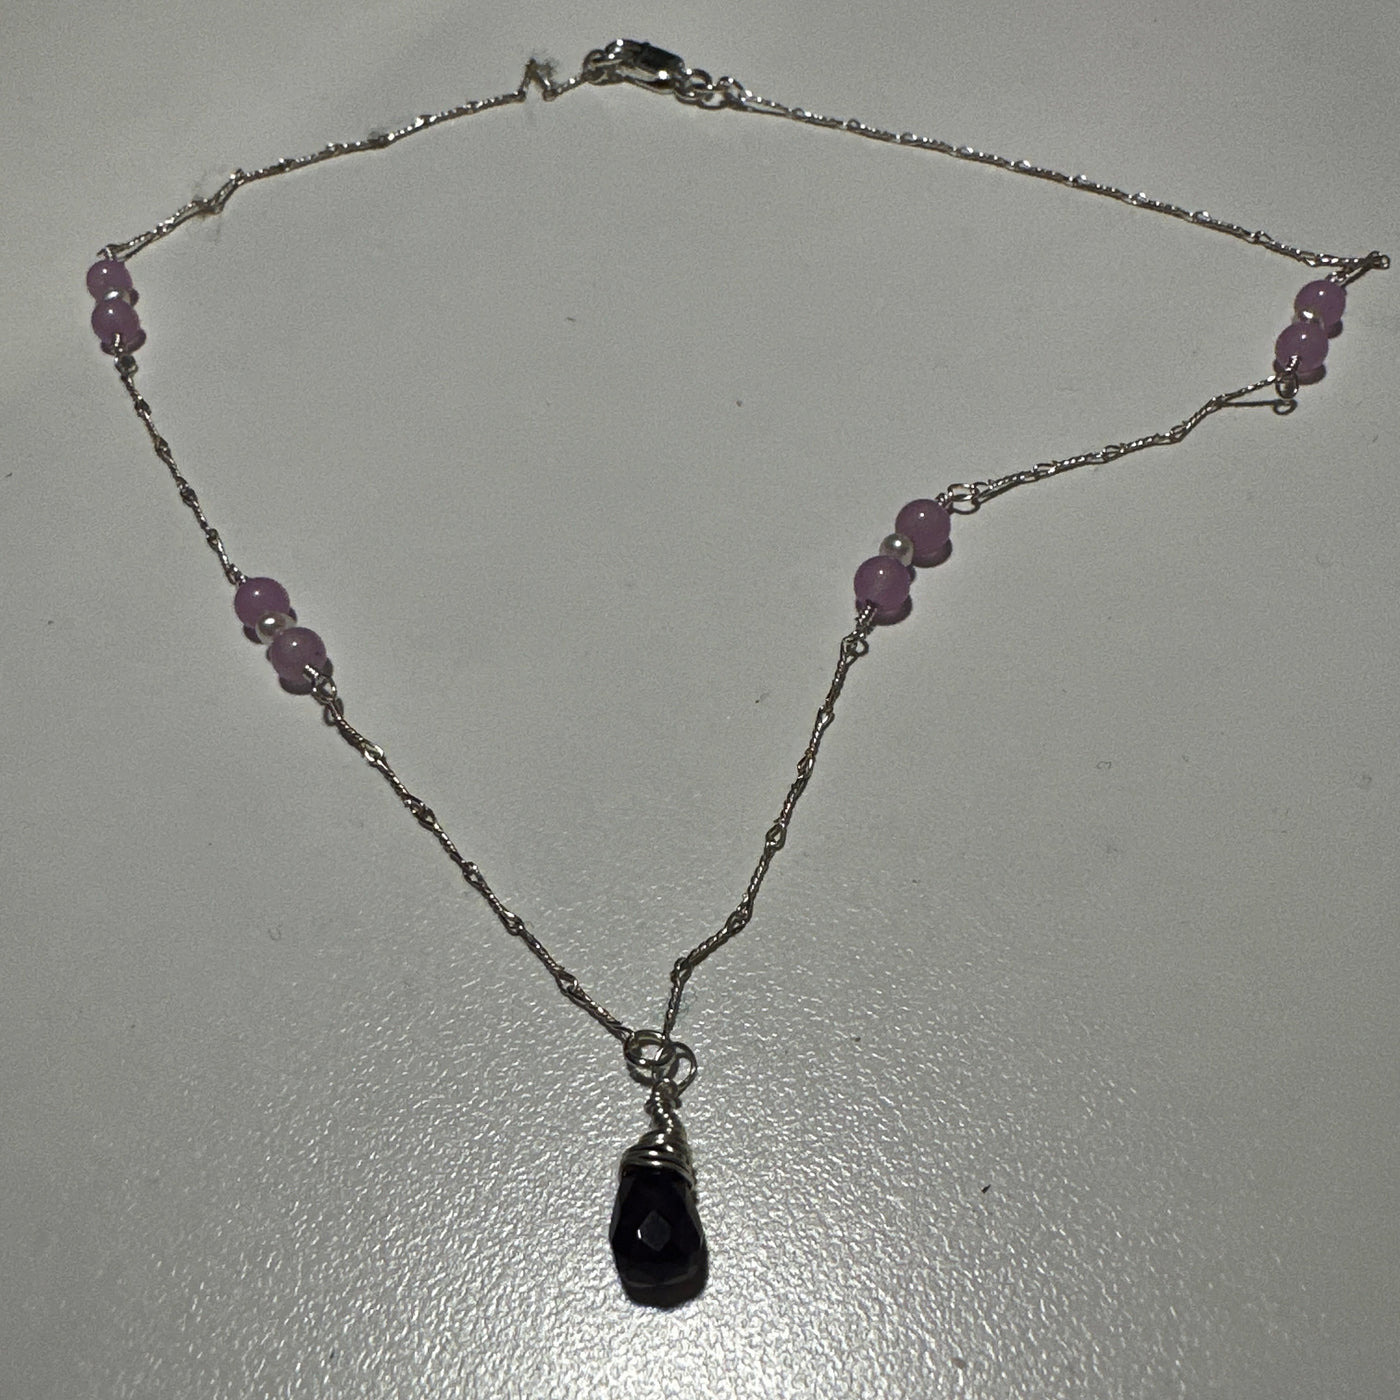 Jade, oval freshwater pearls, and amethyst necklace on silver